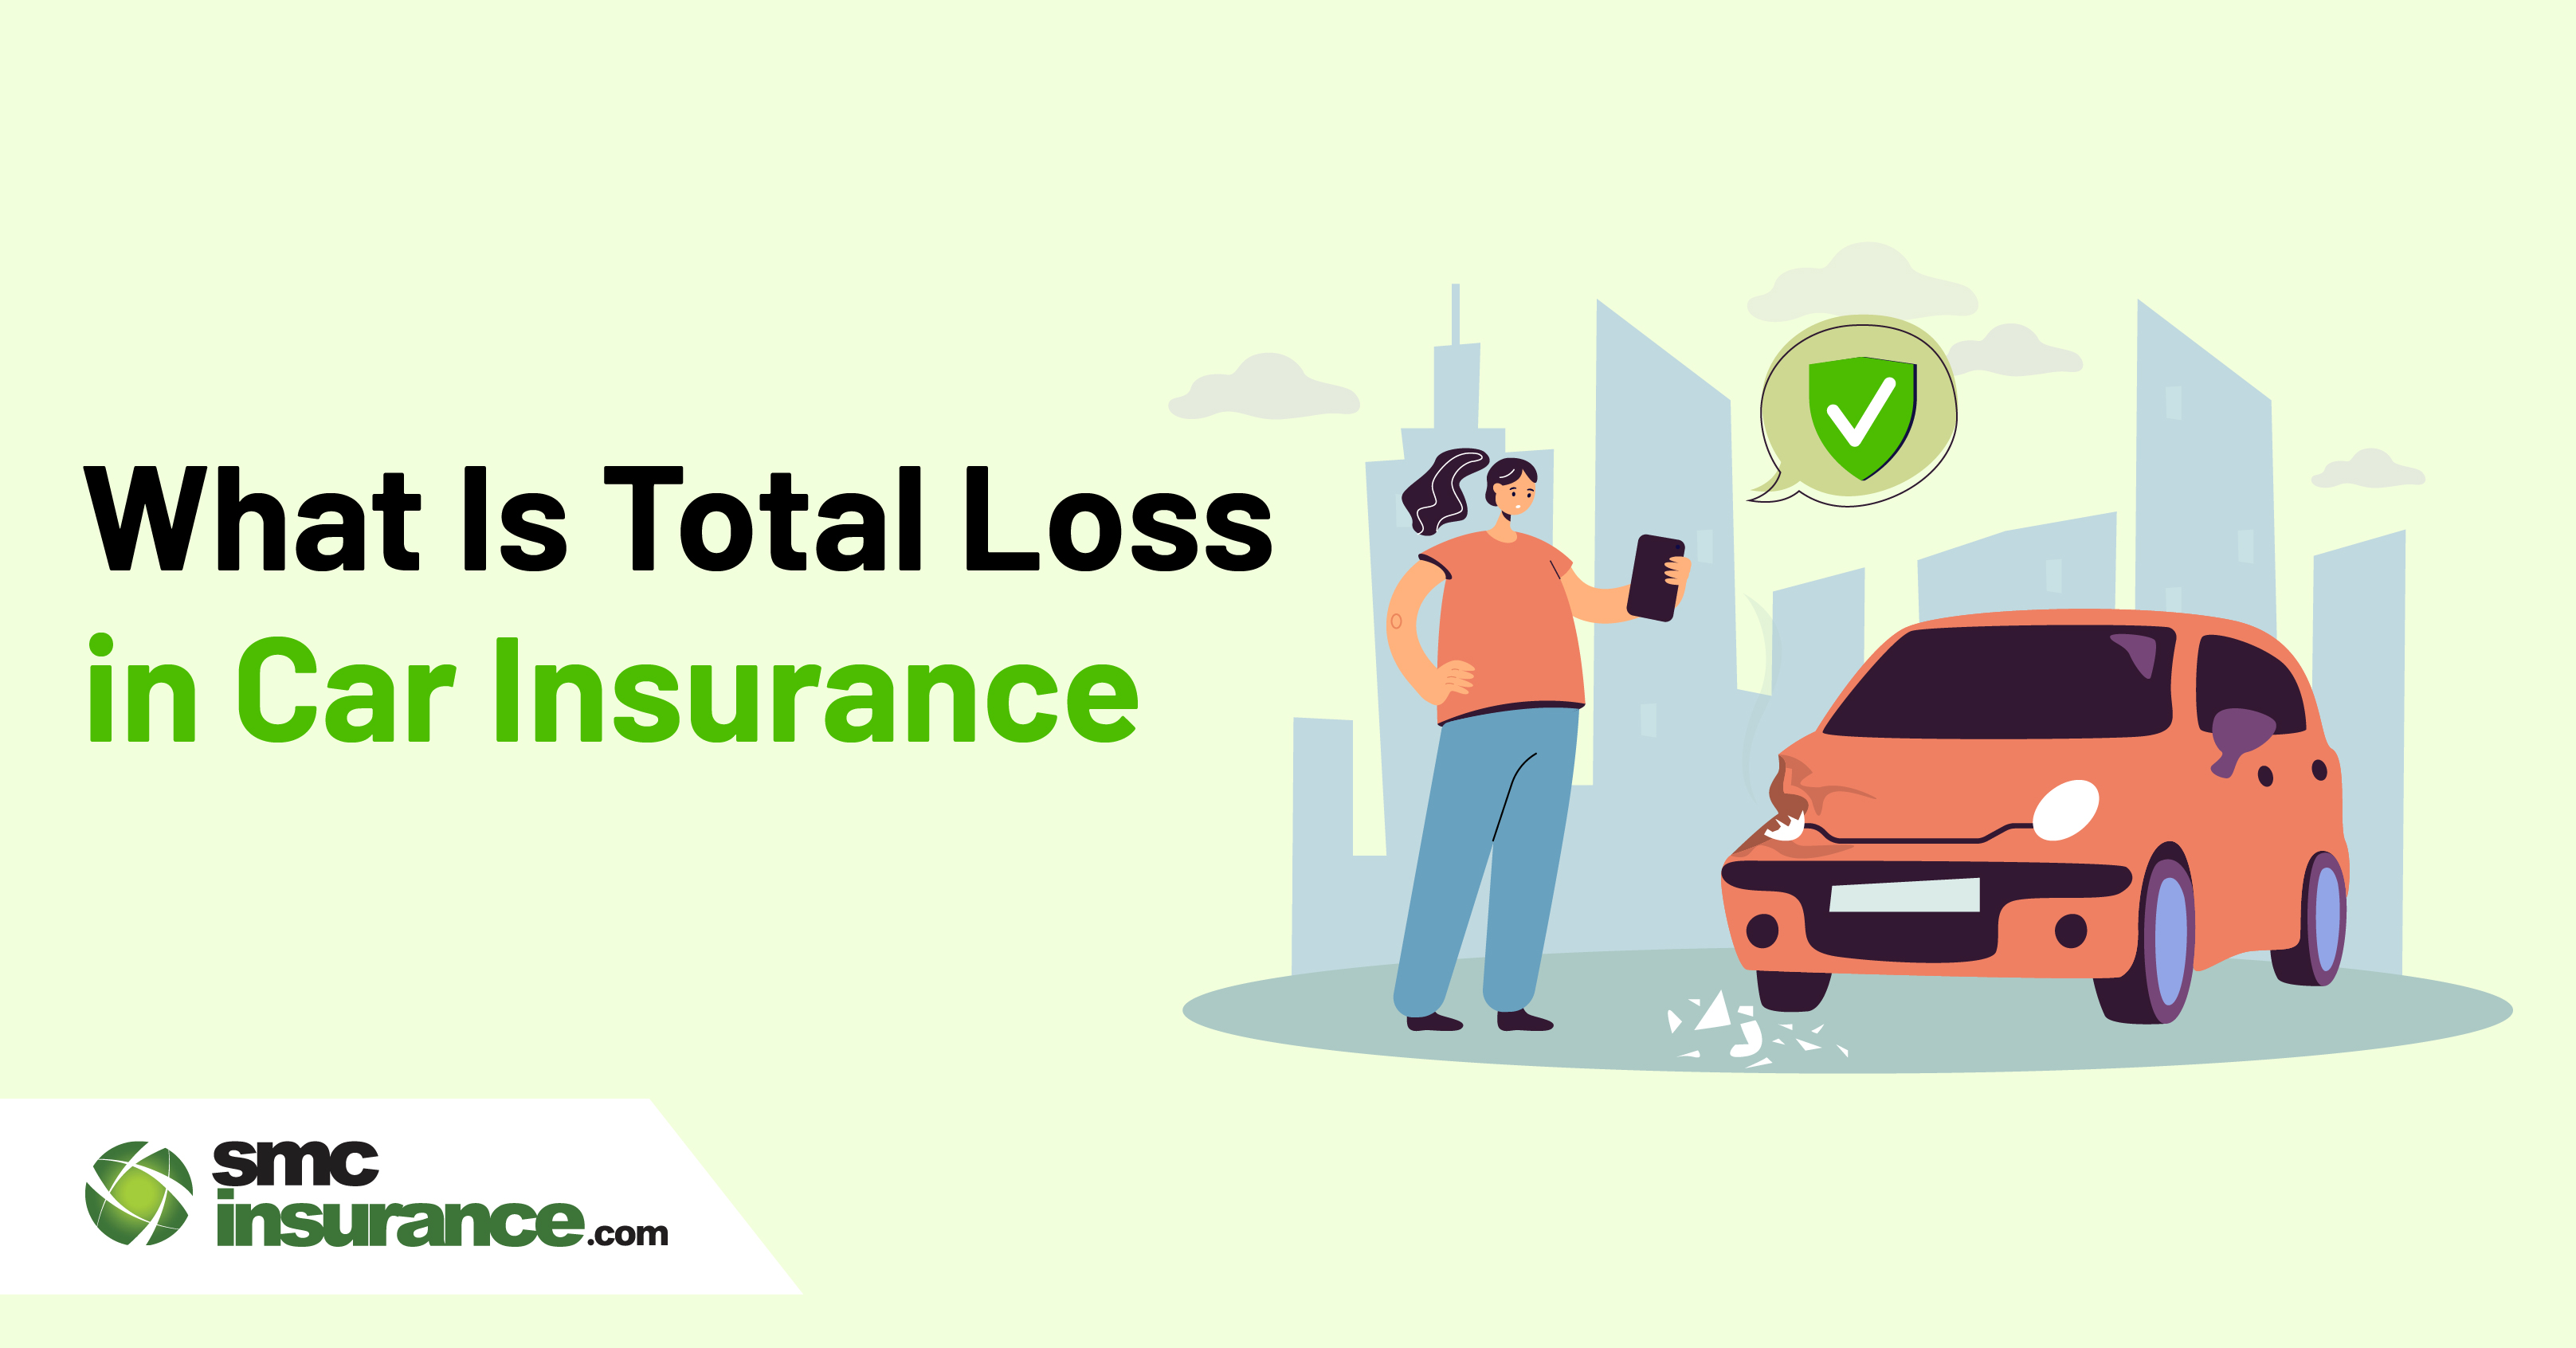 What Is Total Loss In Car Insurance?